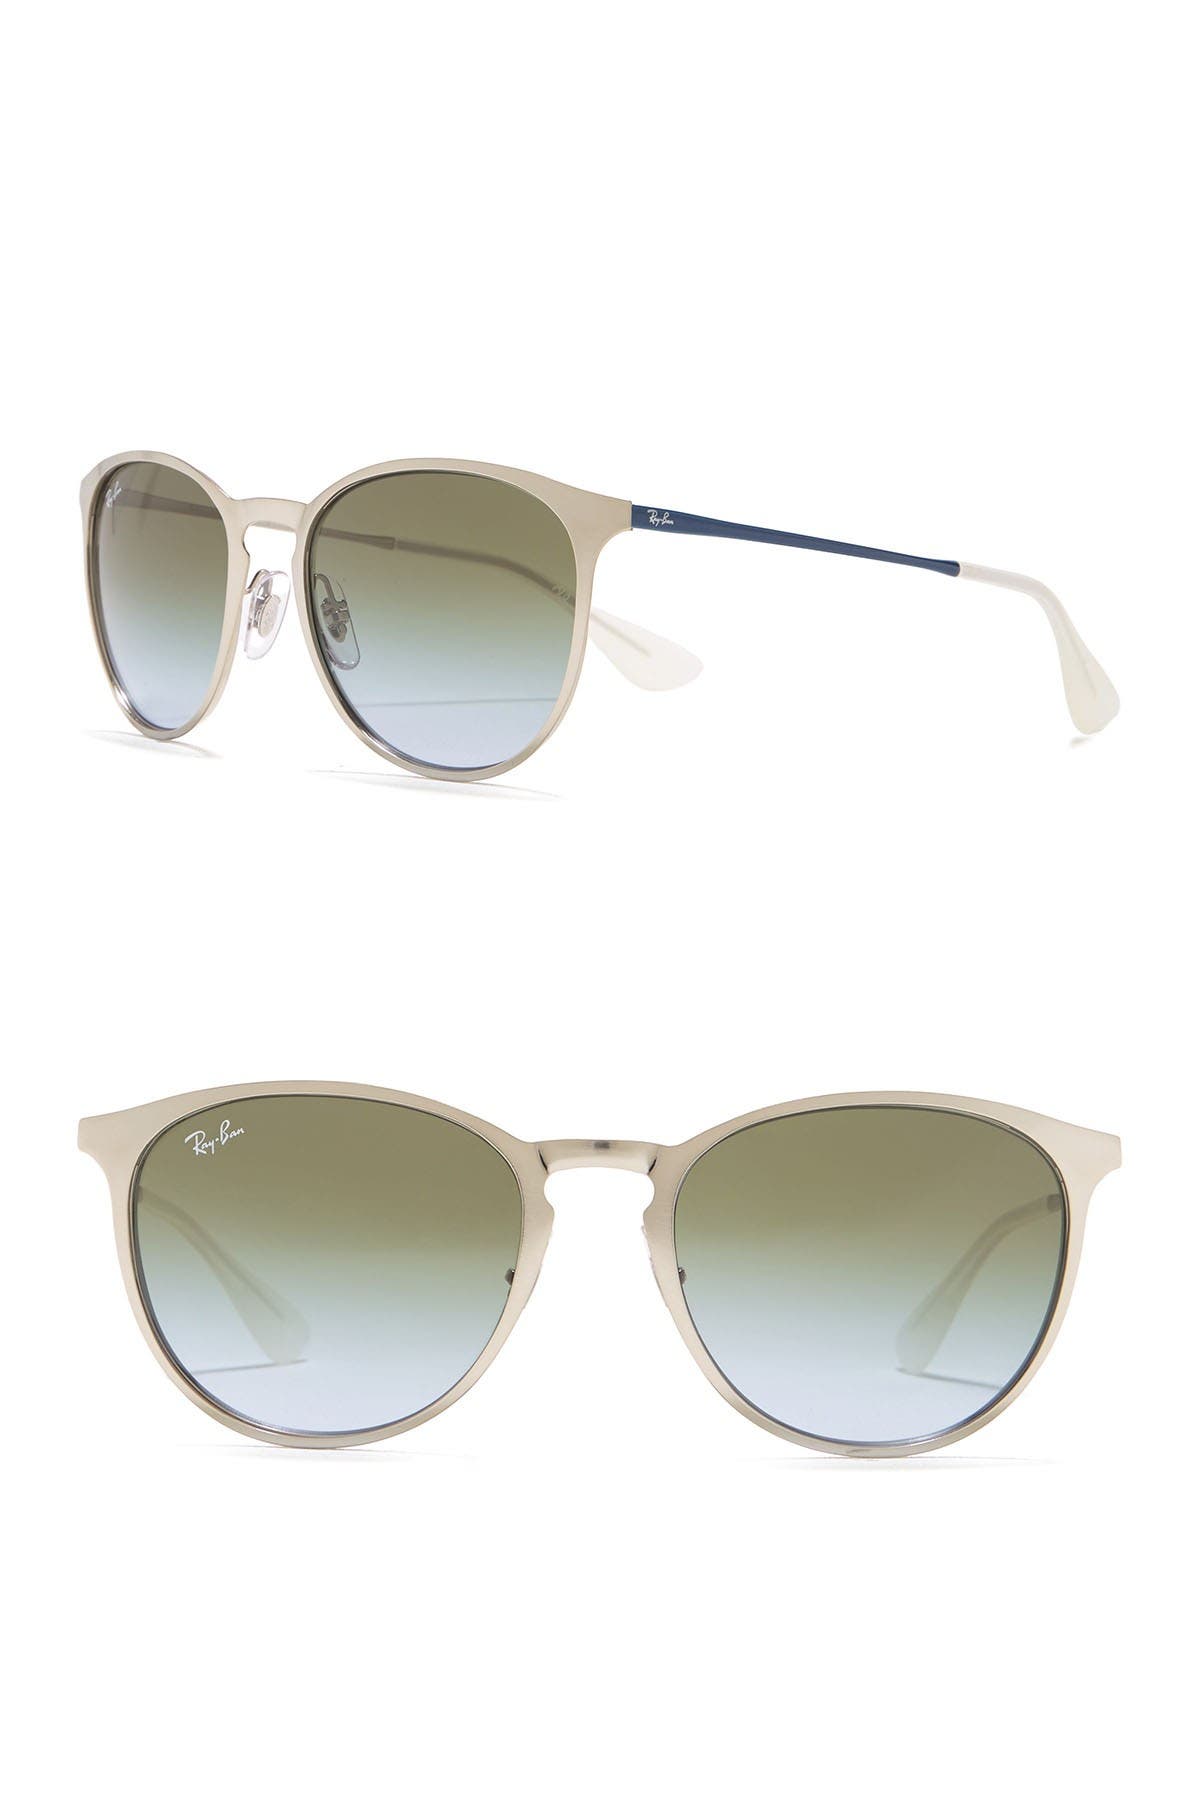 Ray Ban 54mm Erika Round Sunglasses In Silver Blue